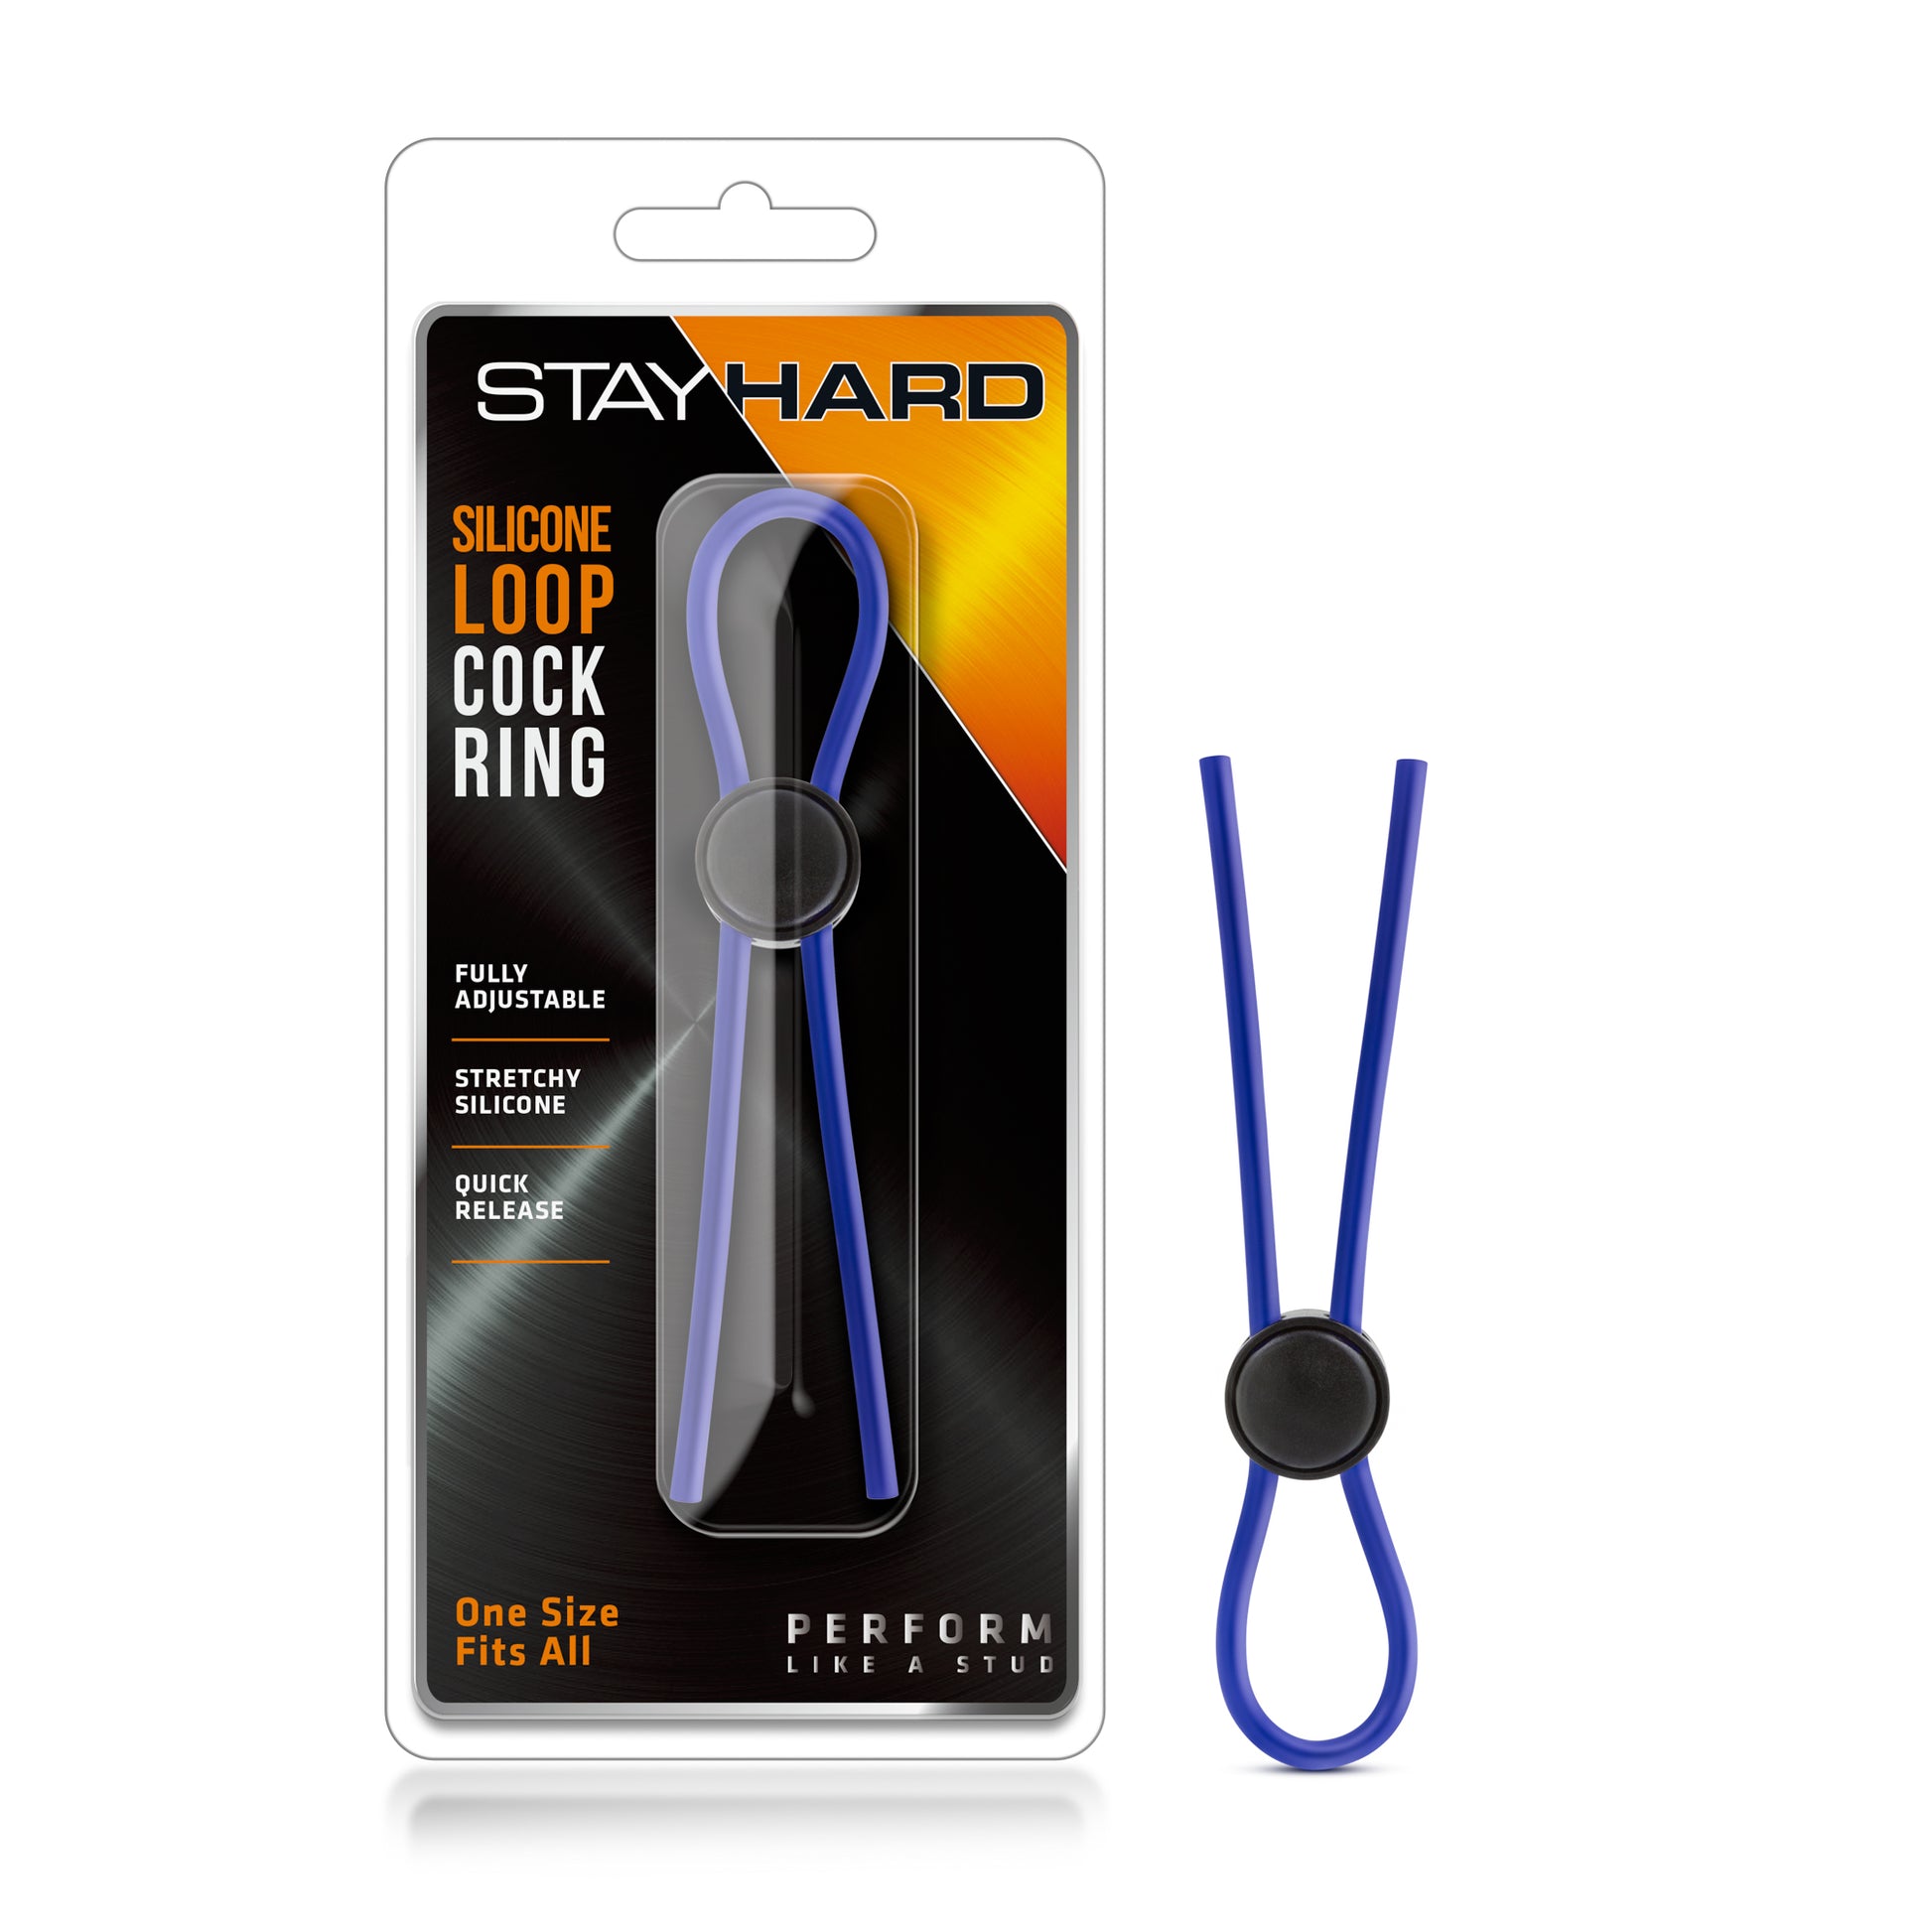 Stay Hard - Silicone Loop Cock Ring - Blue BL-31092